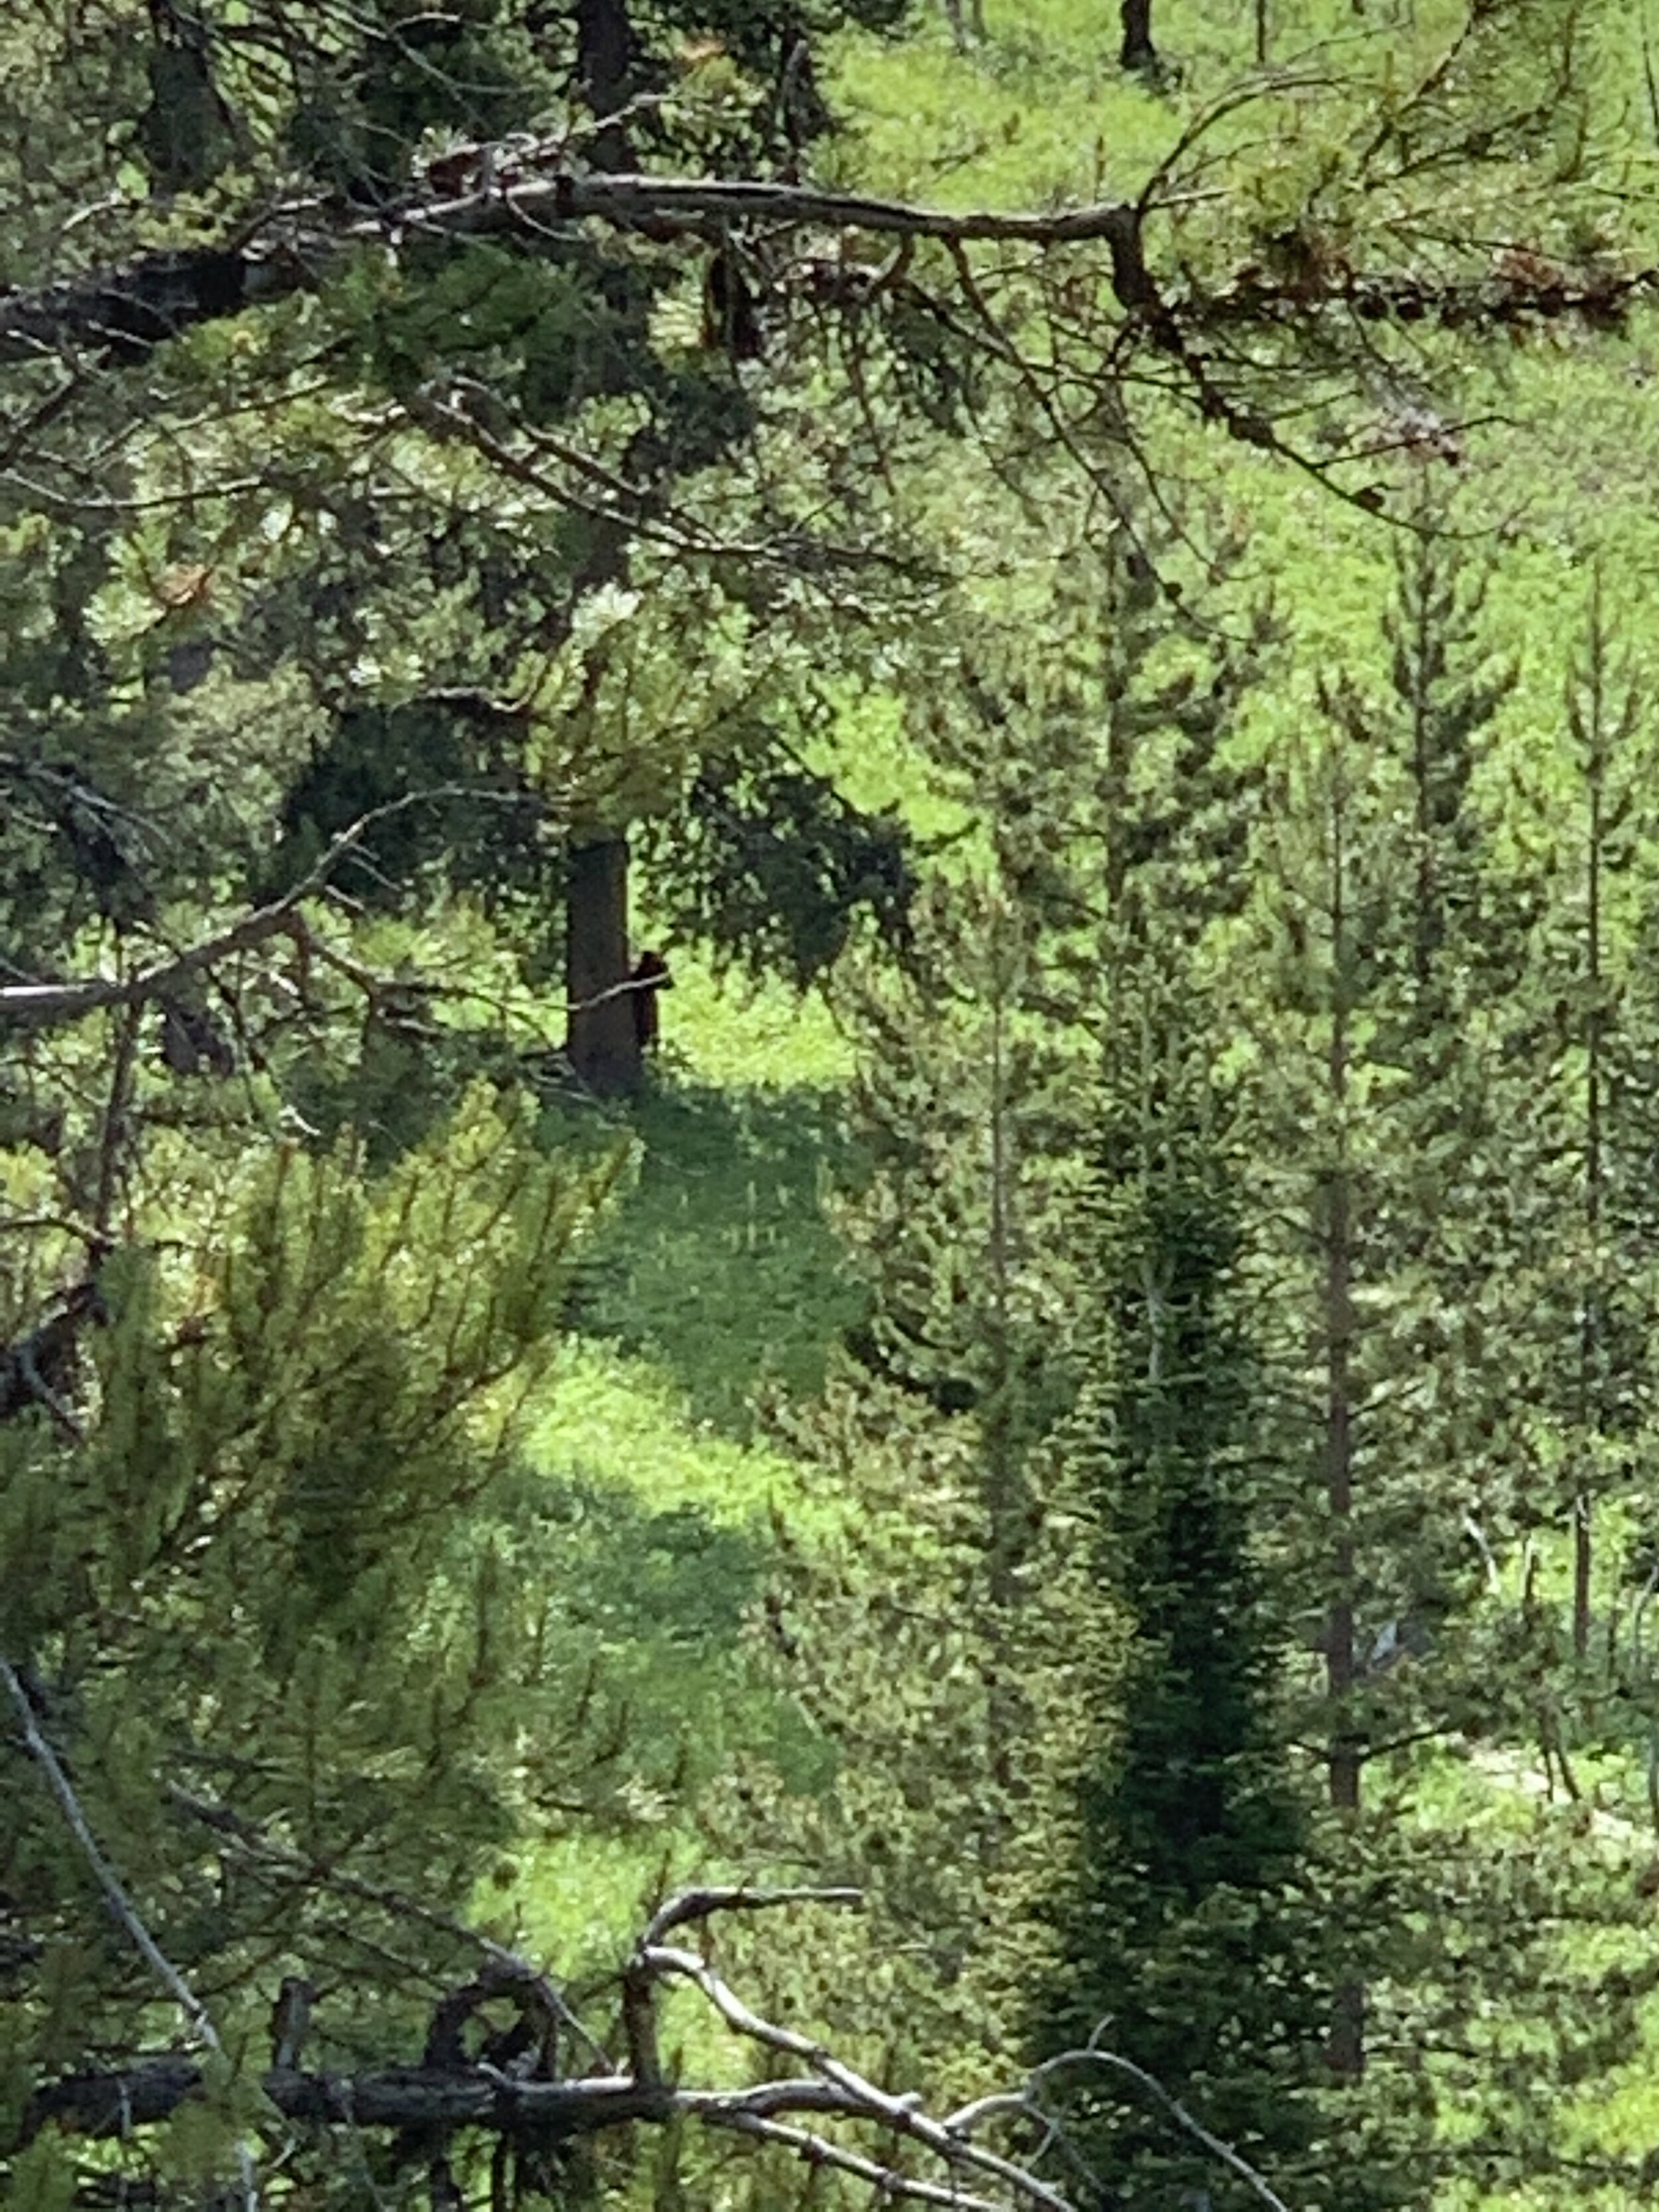  Well, there it is, Folks—The only large wildlife sighting of the whole day. Do you see it? Also note this picture is zoomed in and blown up about 10,000 times. Not exactly the wildlife encounter we were hoping for. 😂 